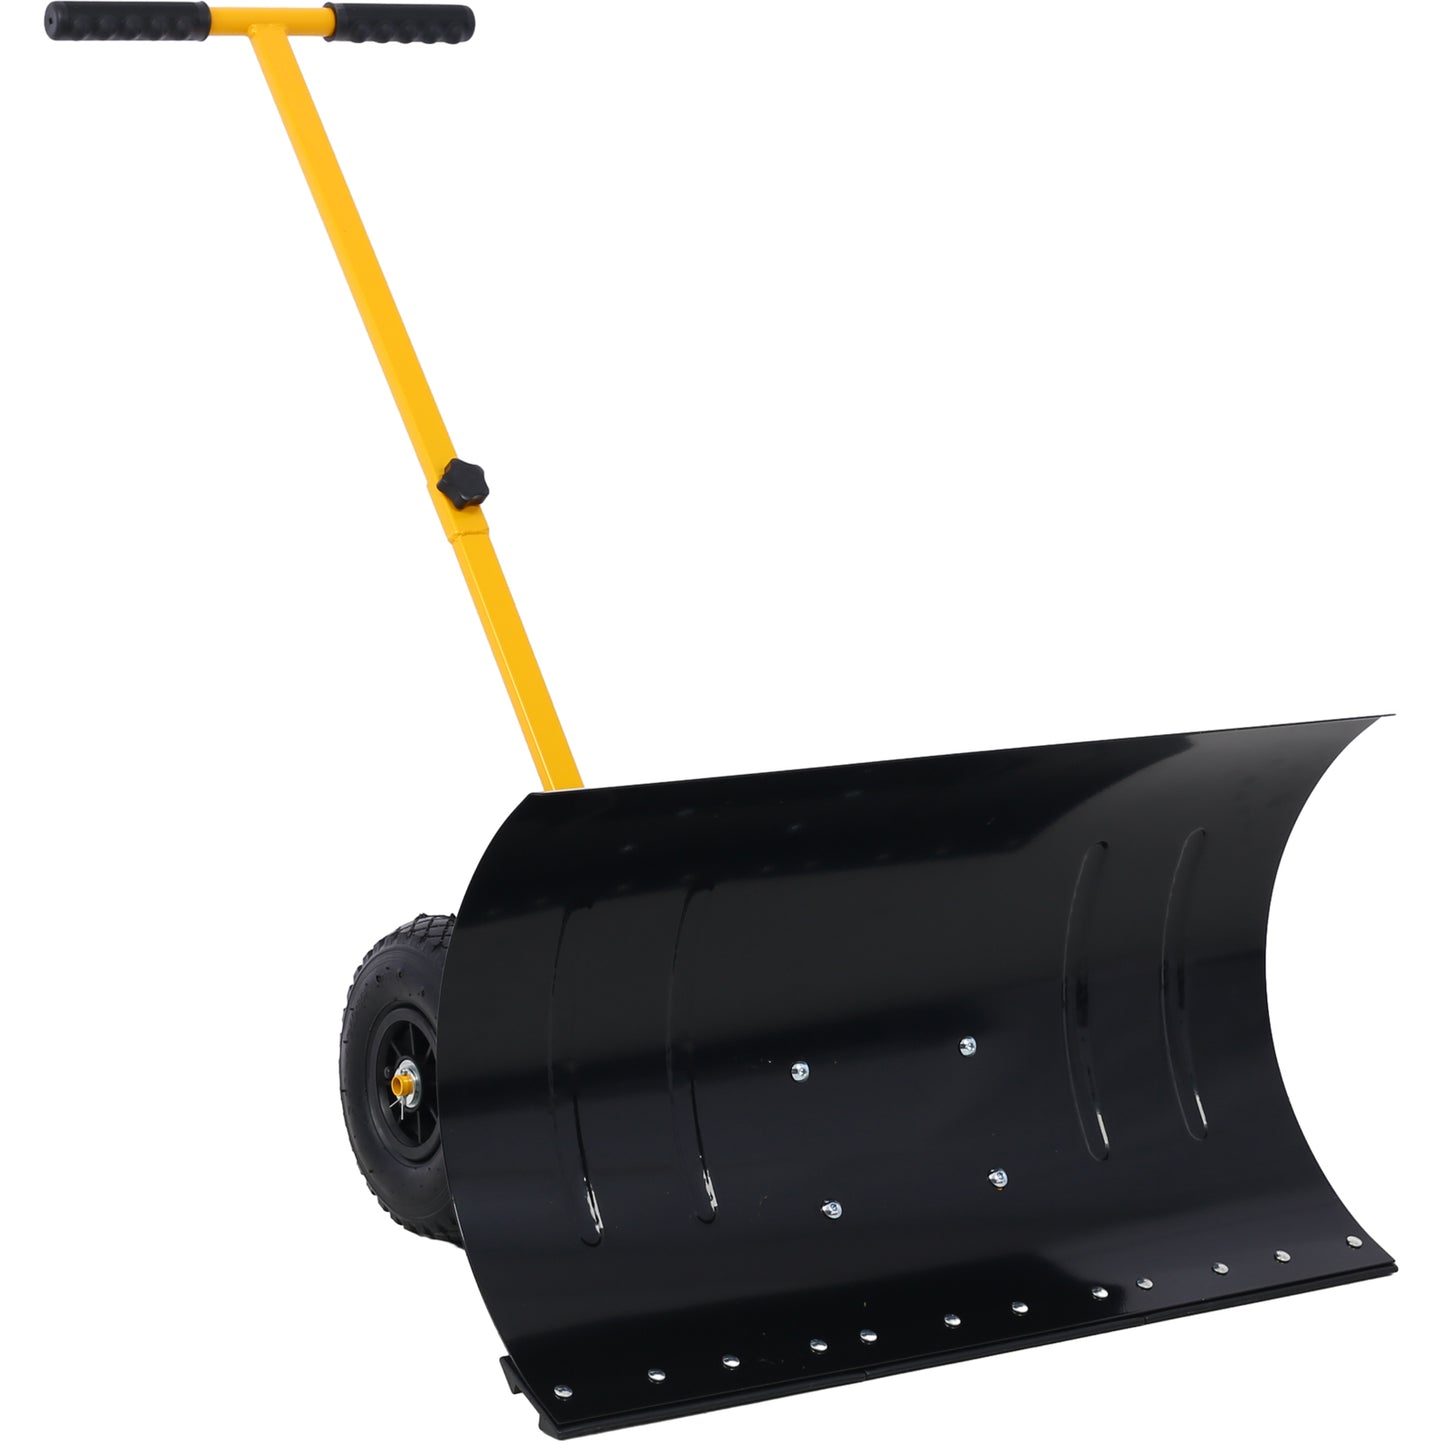 Snow Shovel with Wheels, Snow Pusher, Cushioned Adjustable Angle Handle Snow Removal Tool, 29" Blade, 10" Wheels,yellow color